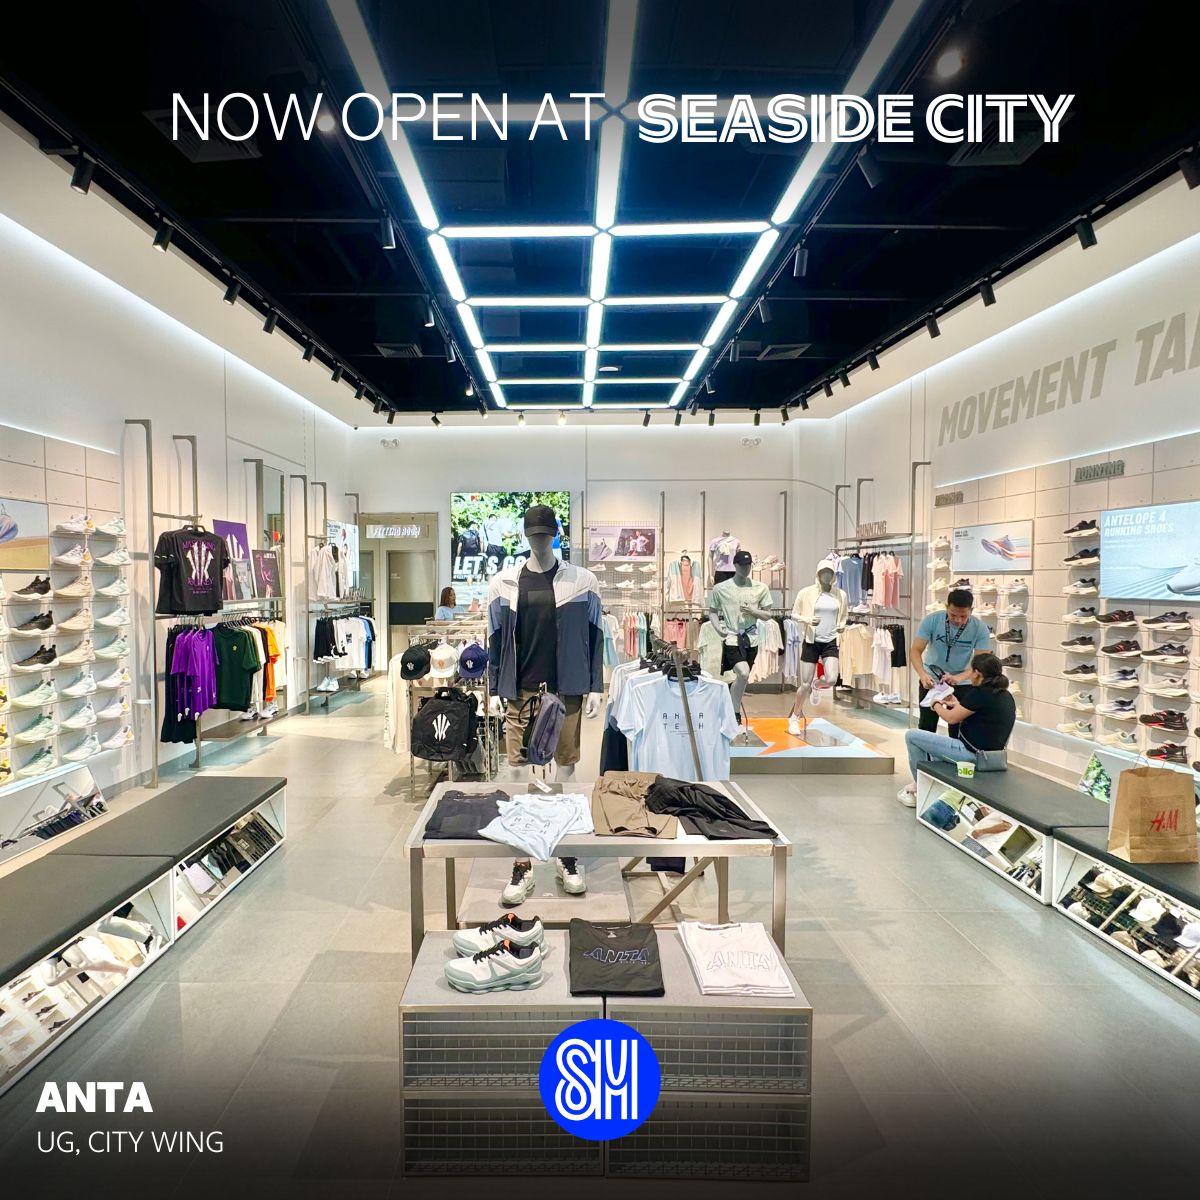 ✨ What's New at Seaside City ✨ ANTA is NOW OPEN! 🤩 One of the world's leading sports brand is officially here in SM Seaside! Stride with confidence and #KeepMoving with Anta! Visit them at the UG, City Wing today! 👟✨ #EverythingsHereAtSM #AWorldOfExperienceAtSM